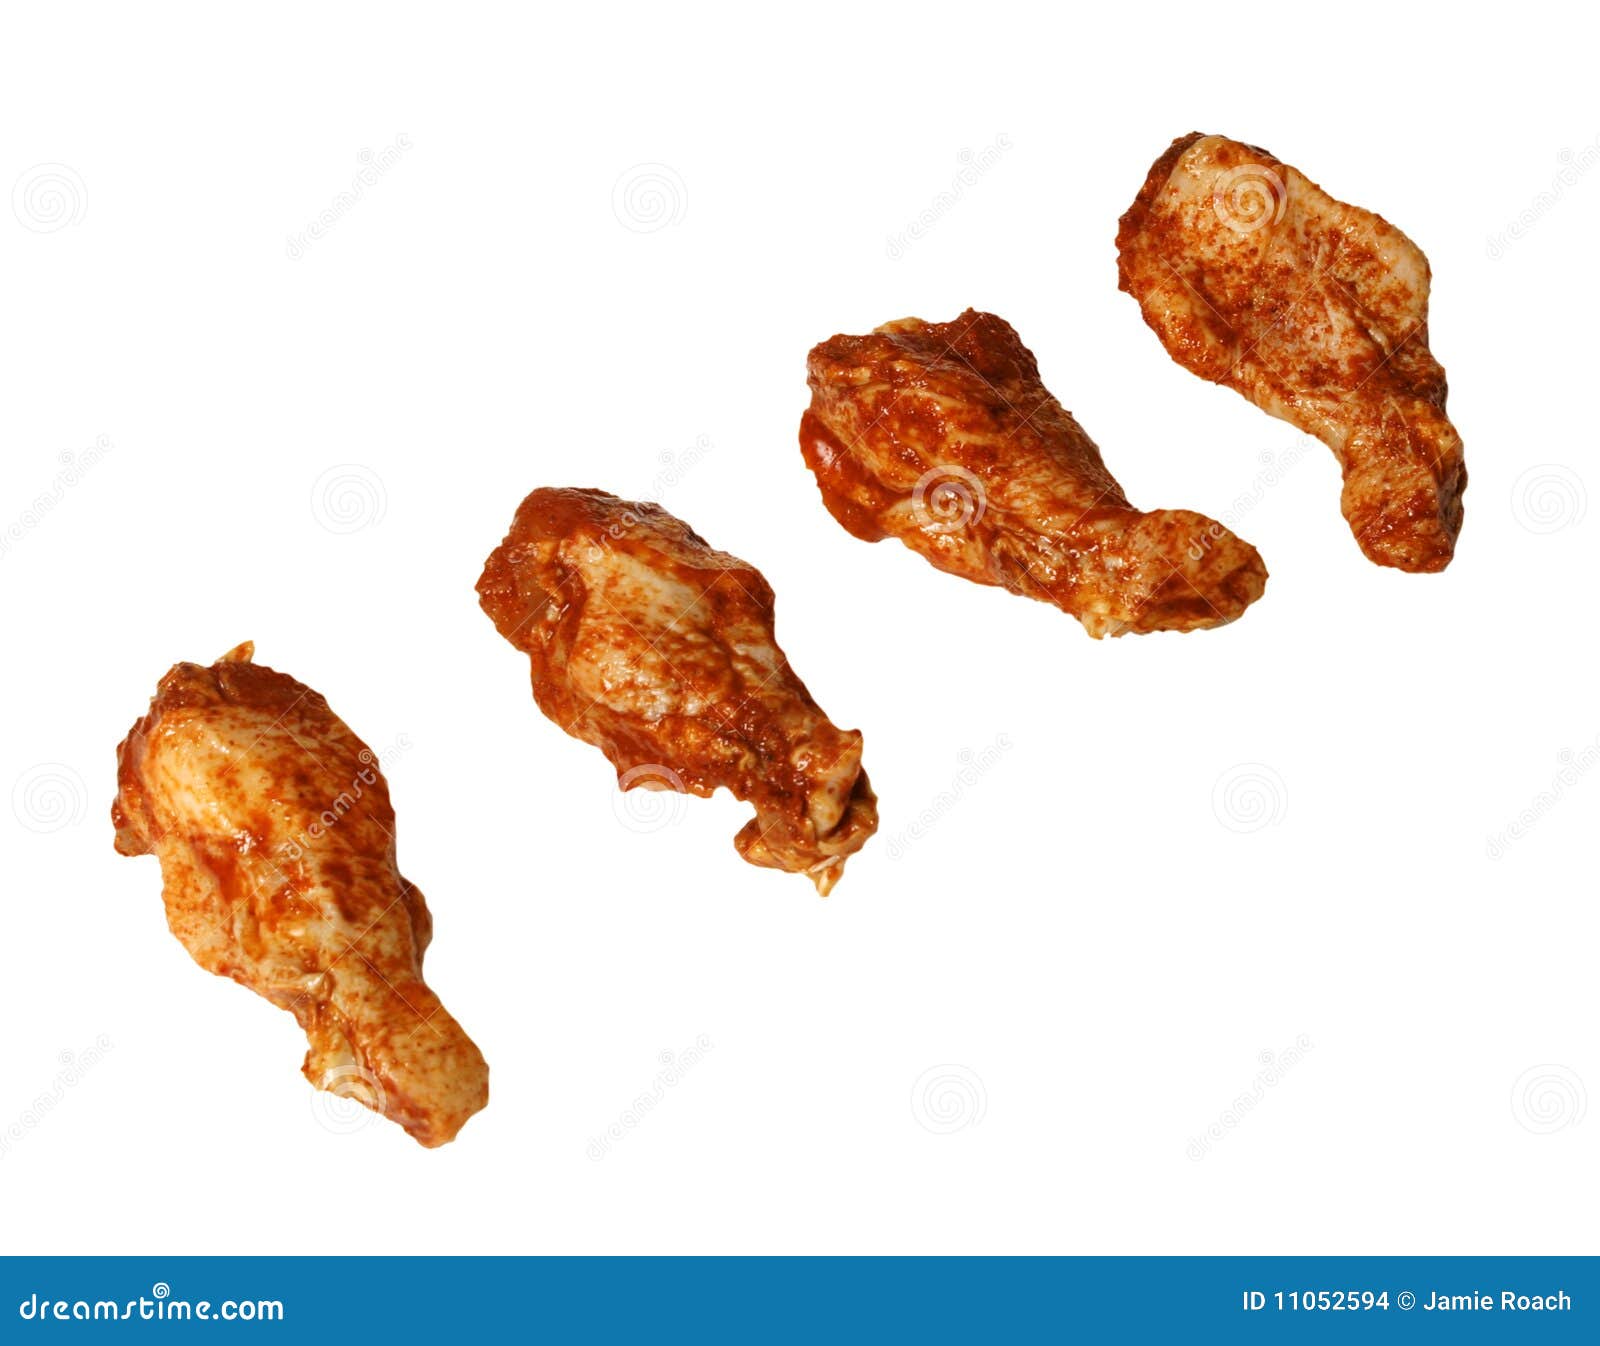 clipart chicken wings - photo #28